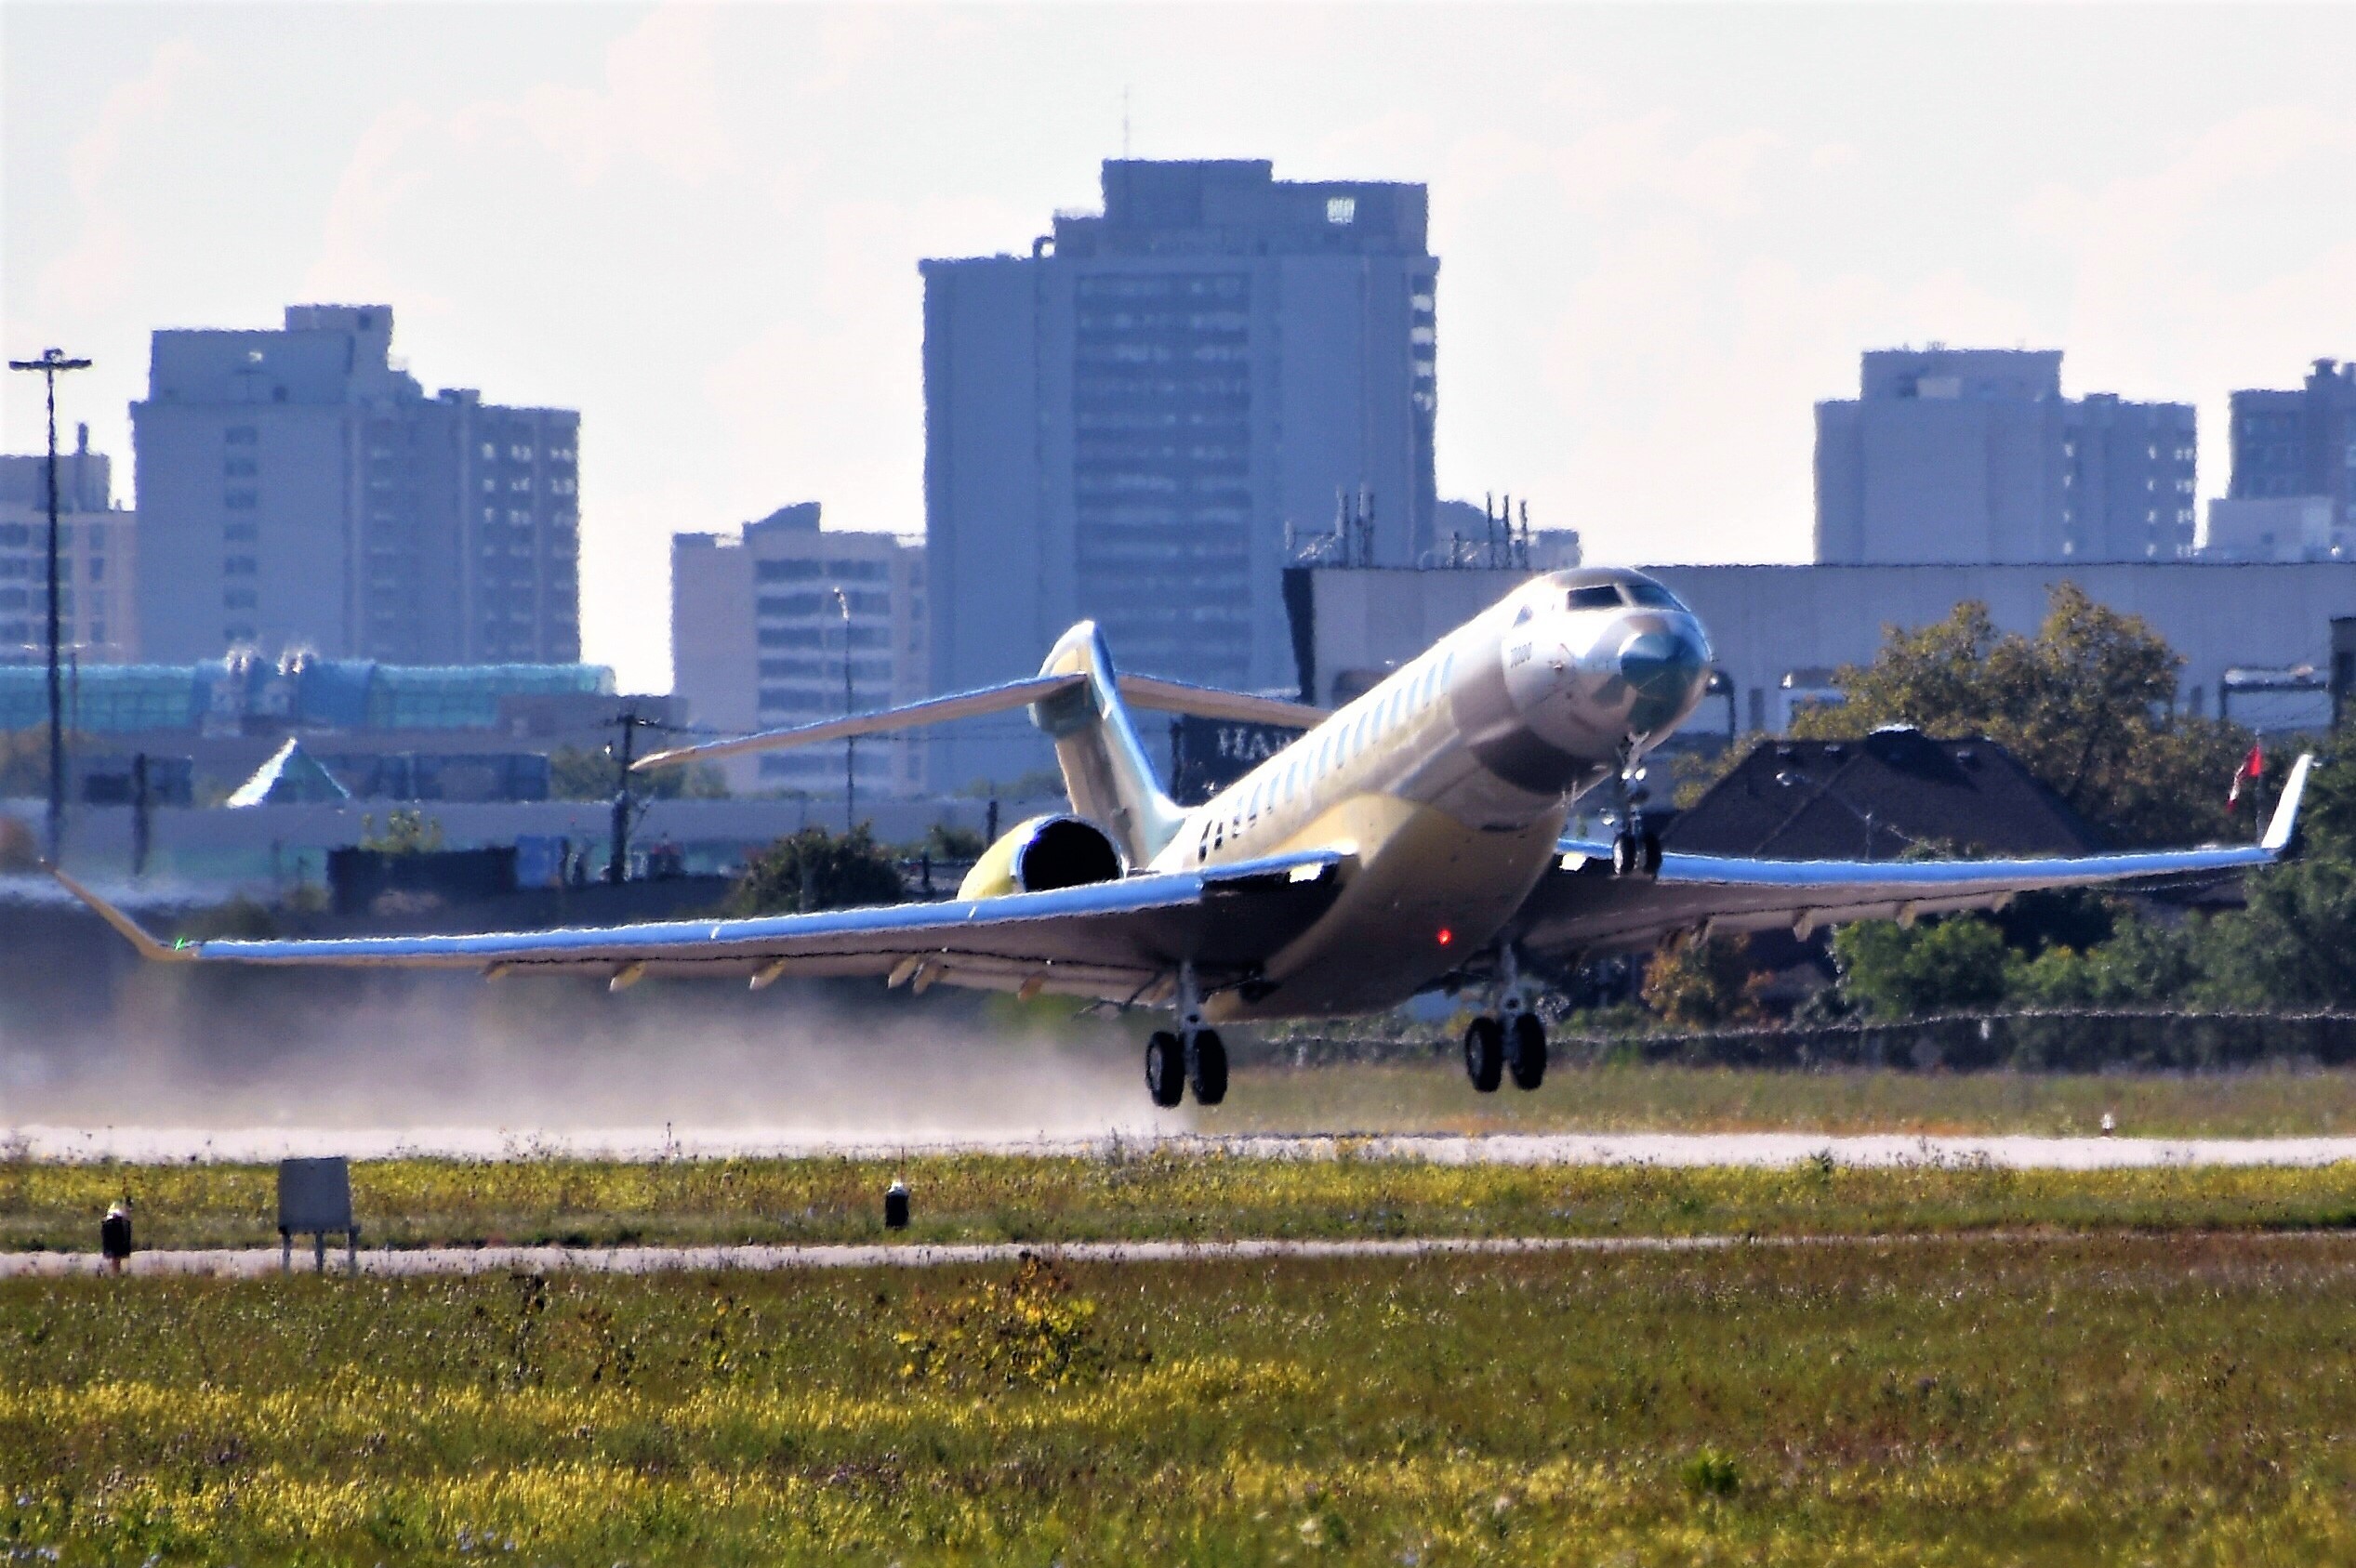 The 100th Global 7500 made its first flight on Sept. 10, 2021. Under a cloudless sky, C-GVEU (serial number 70100) lifted off runway 33 at Downsview Airport in Toronto. Photo by Frederick K. Larkin